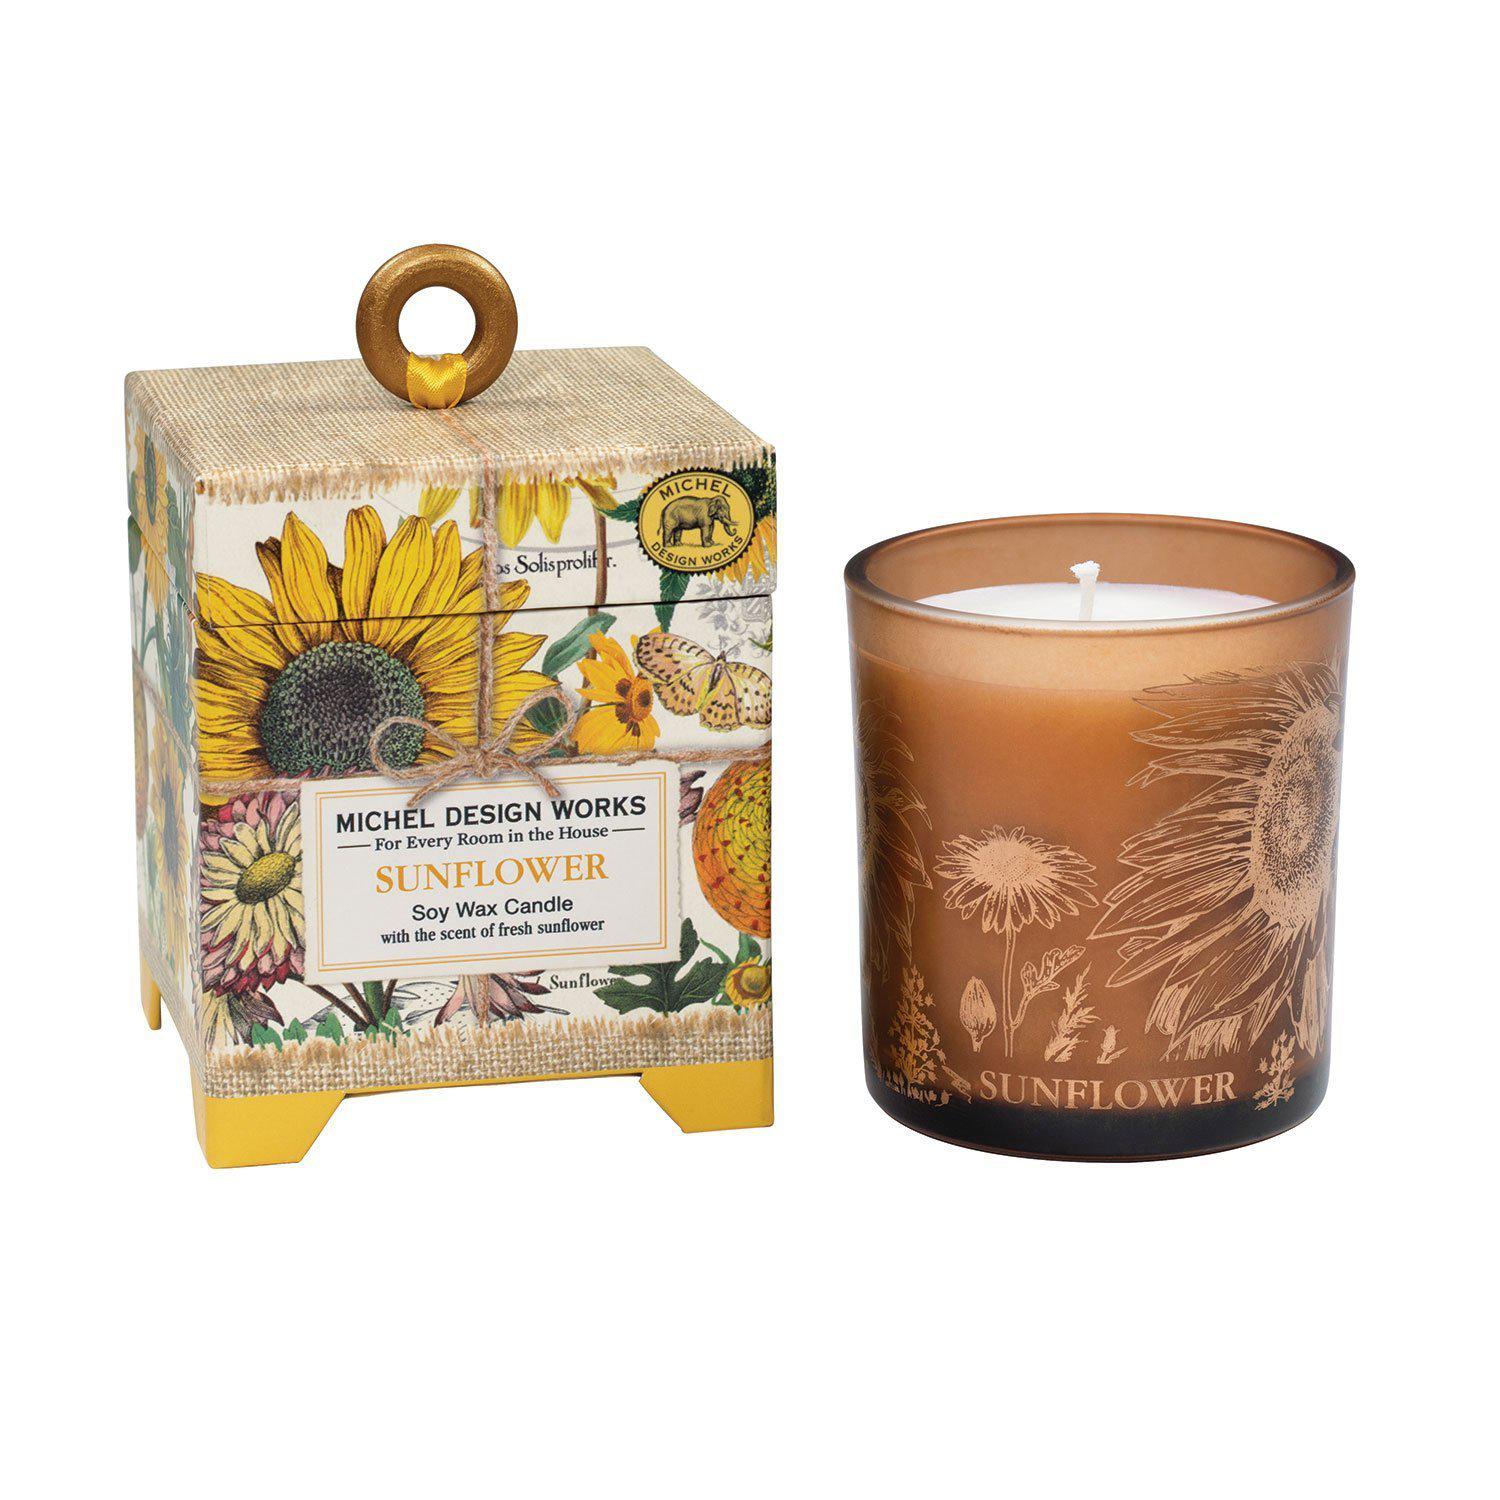 Michel Design Works Soy Wax Candle - Sunflower - BeautyOfASite - Central Illinois Gifts, Fashion & Beauty Boutique